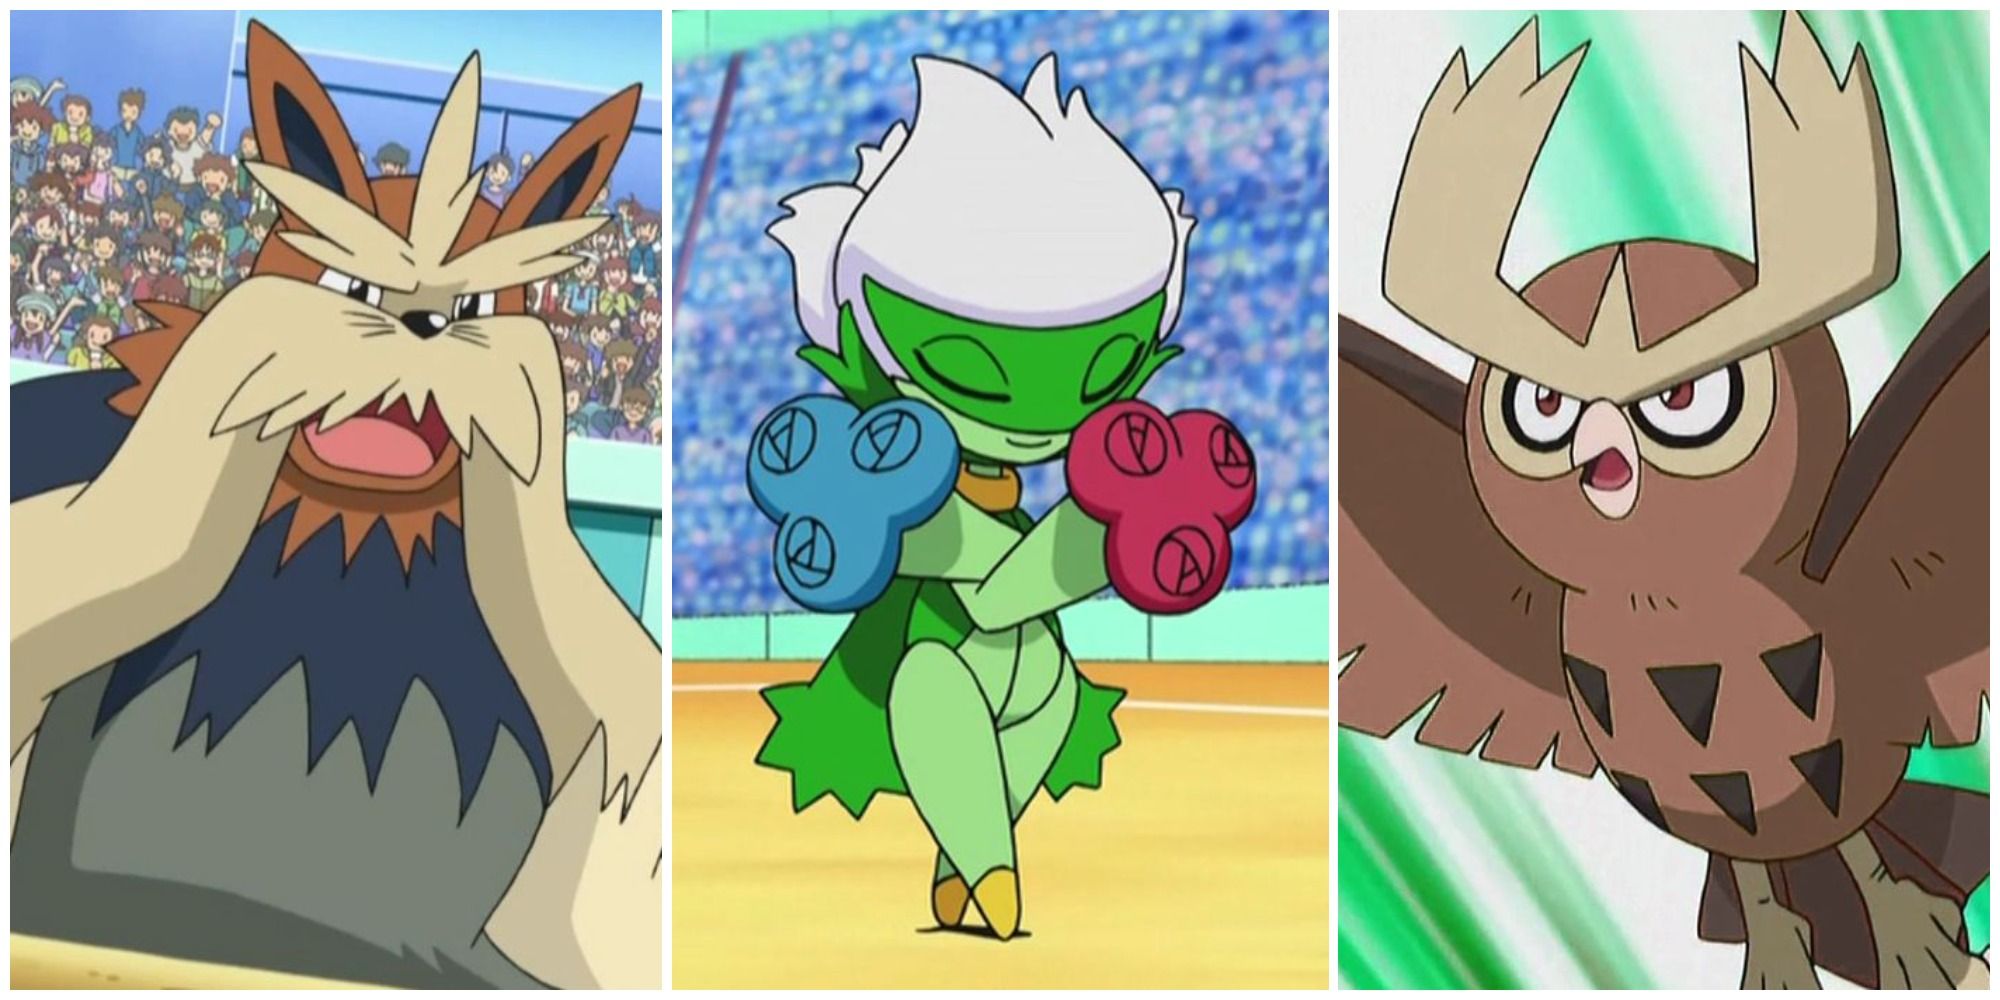 TheMediaHoundsShow on X: What unused type combination of pokemon would you  like to see explored in gen 9? And what pokemon deserve regional variants  in your opinion and/ or could benefit from